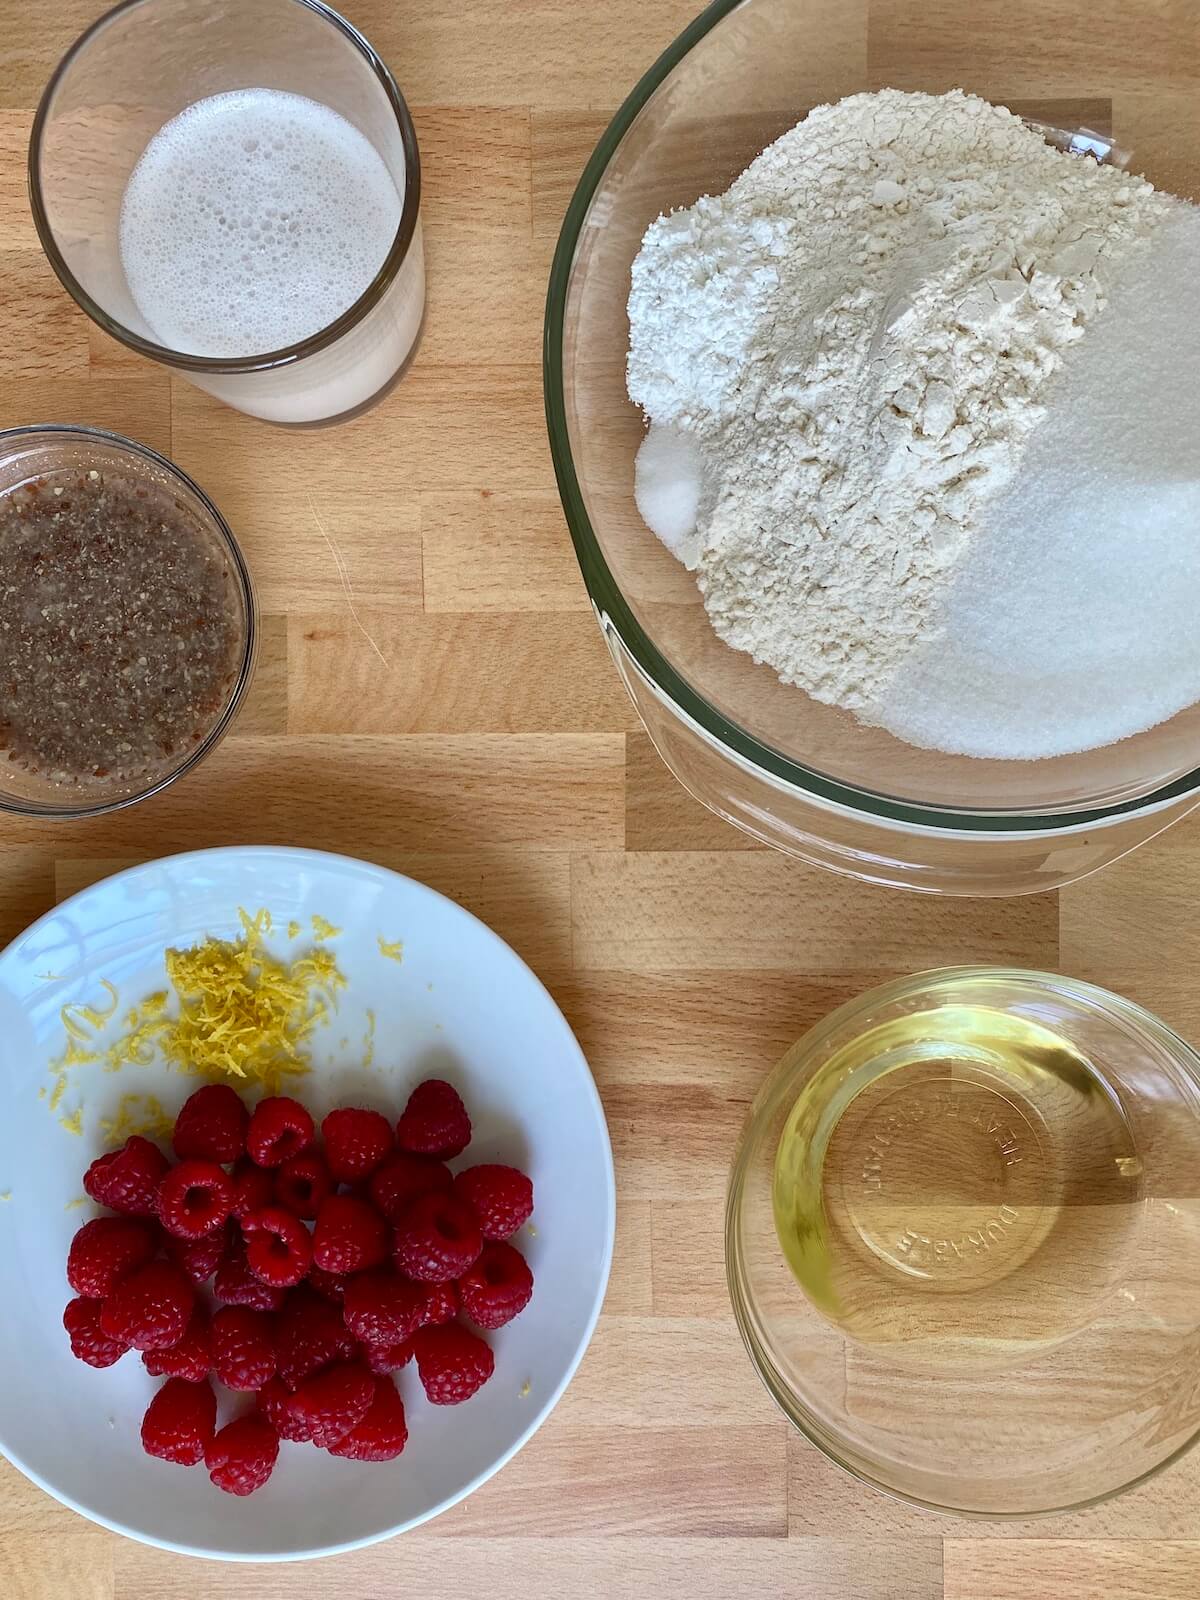 The ingredients to make the vegan raspberry muffins displayed in various bowls on a butcher block countertop.